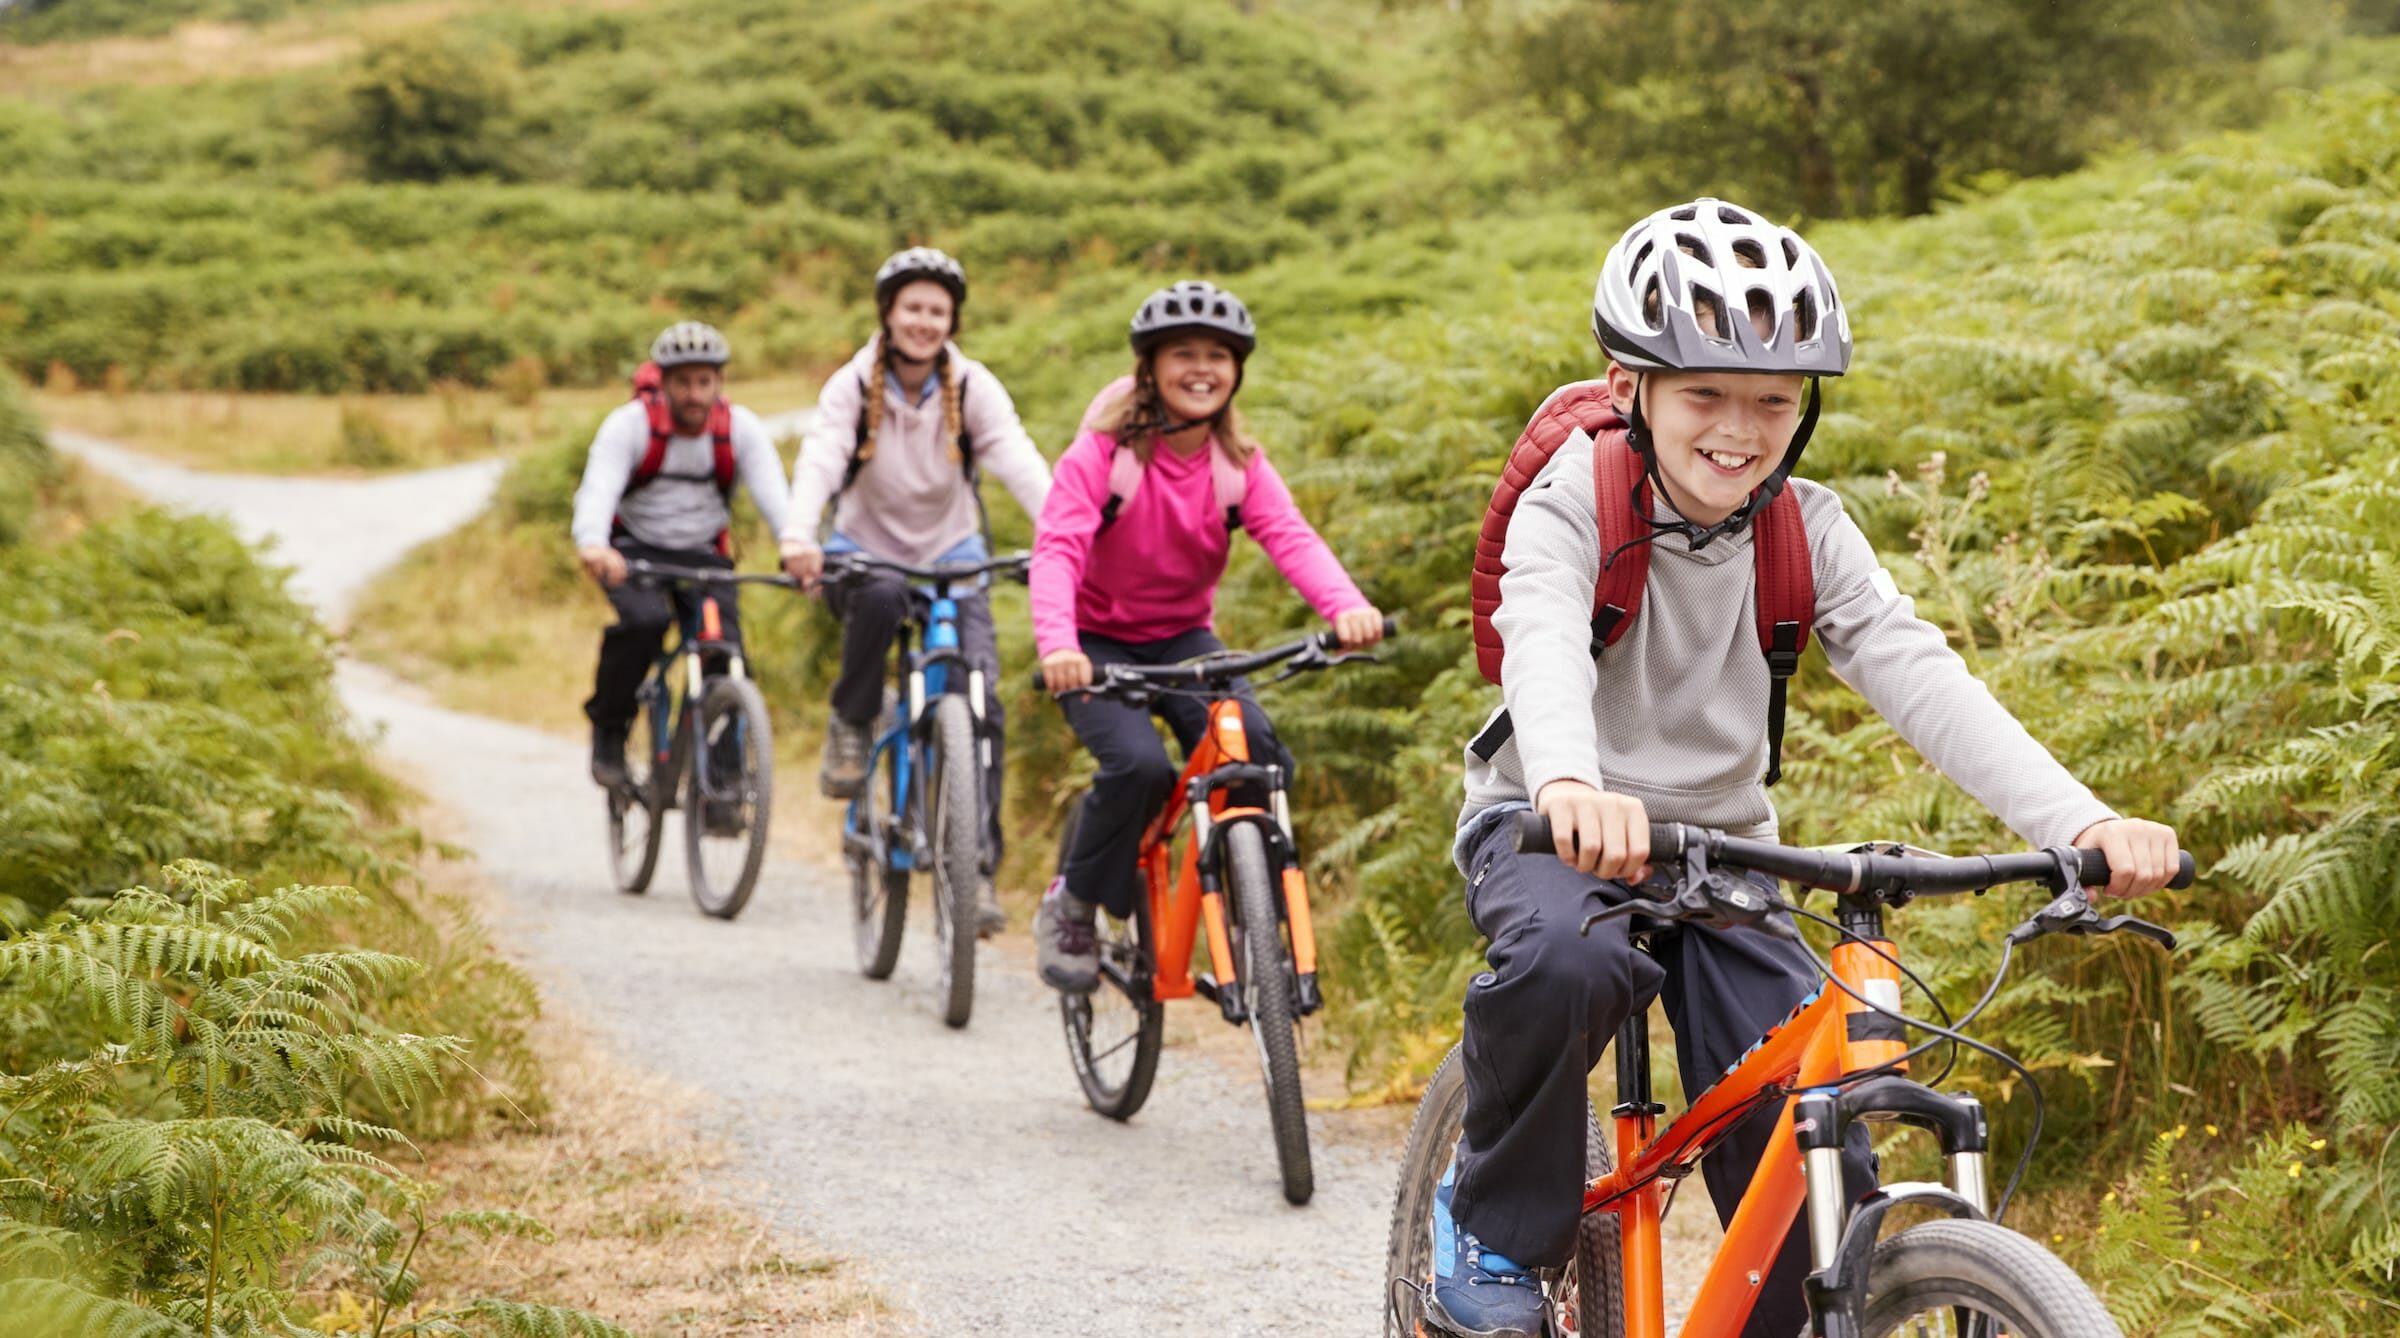 Get summer cycle ready with the whole family at decathlon